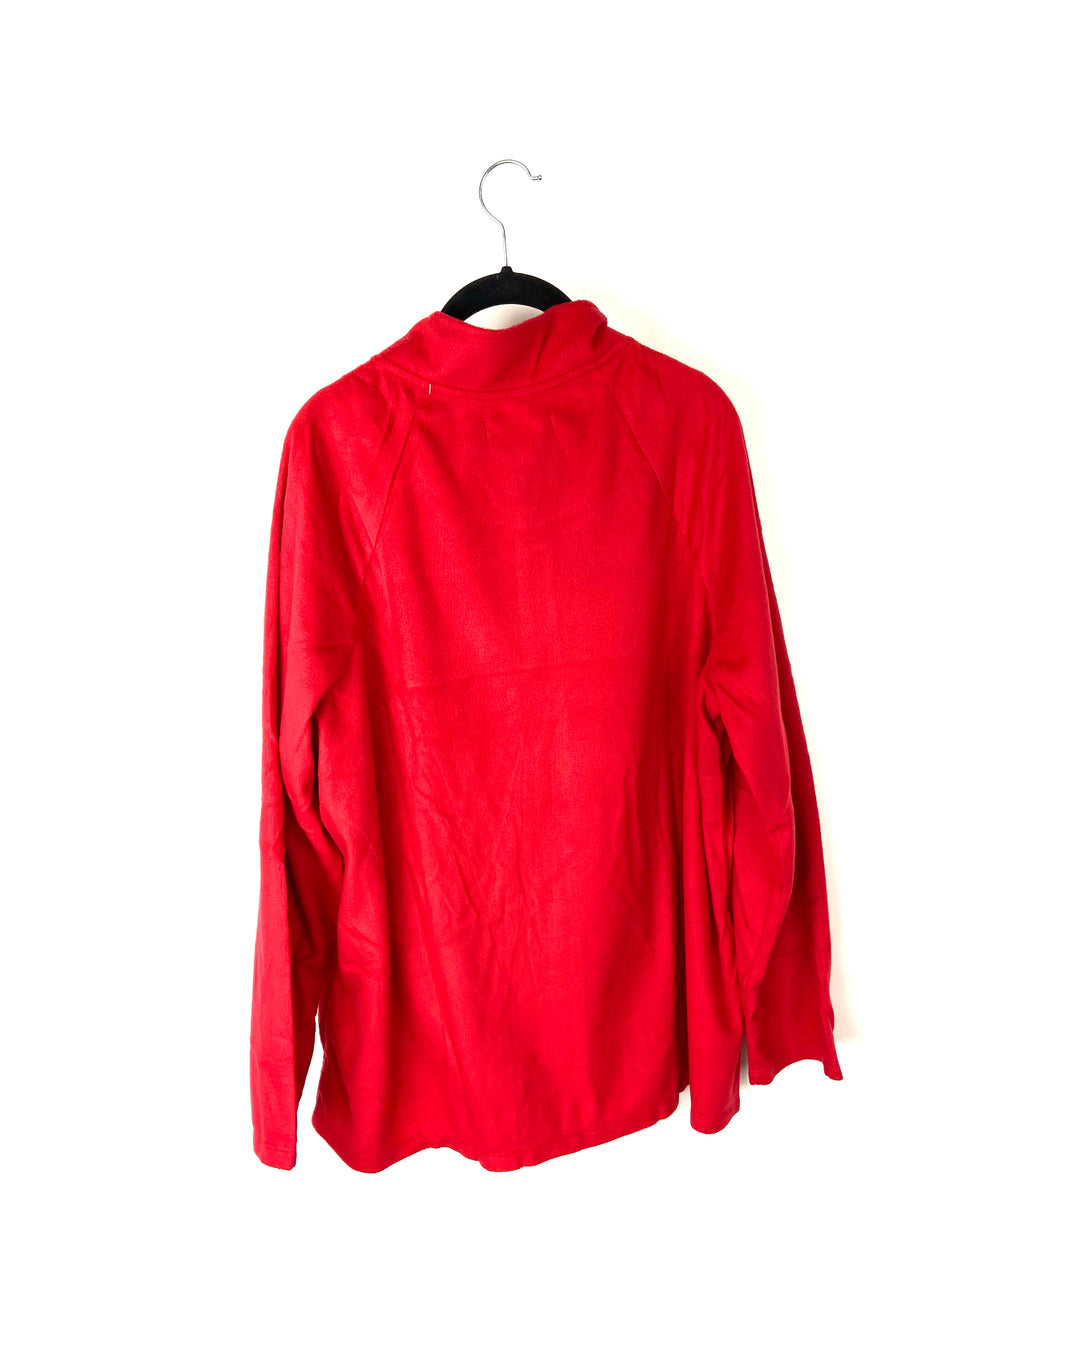 Red Zip-Up Jacket - Large and Extra Extra Large